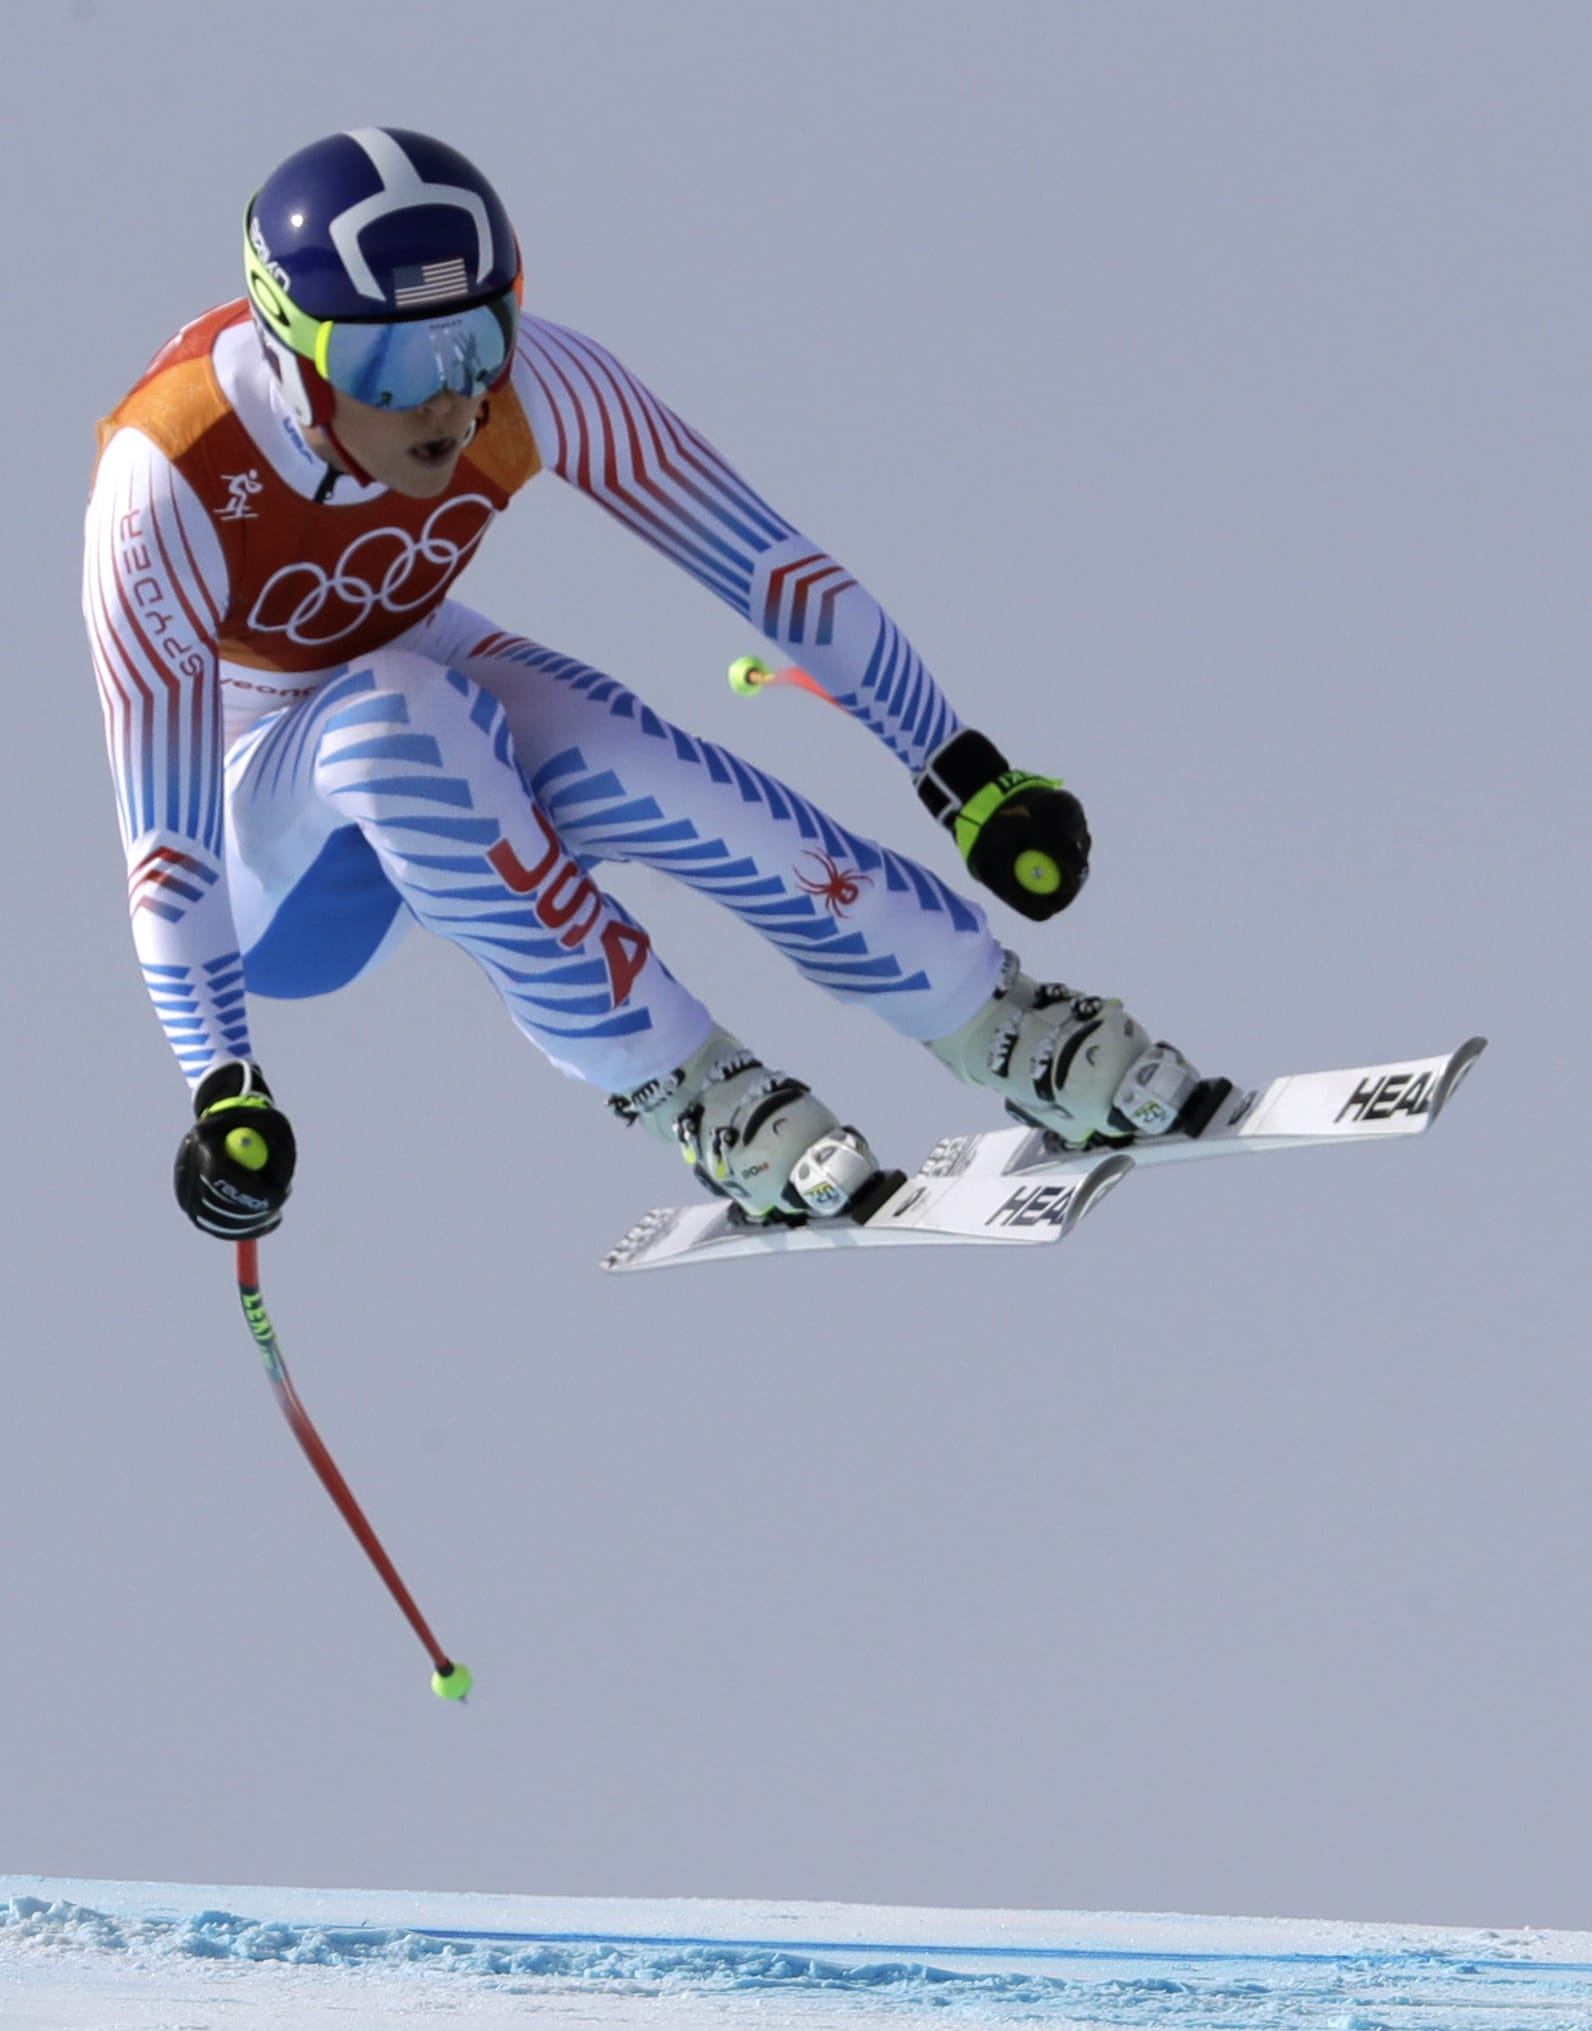 United States' Lindsey Vonn competes in the women's downhill at the 2018 Winter Olympics in Jeongseon, South Korea, Wednesday, Feb. 21, 2018.